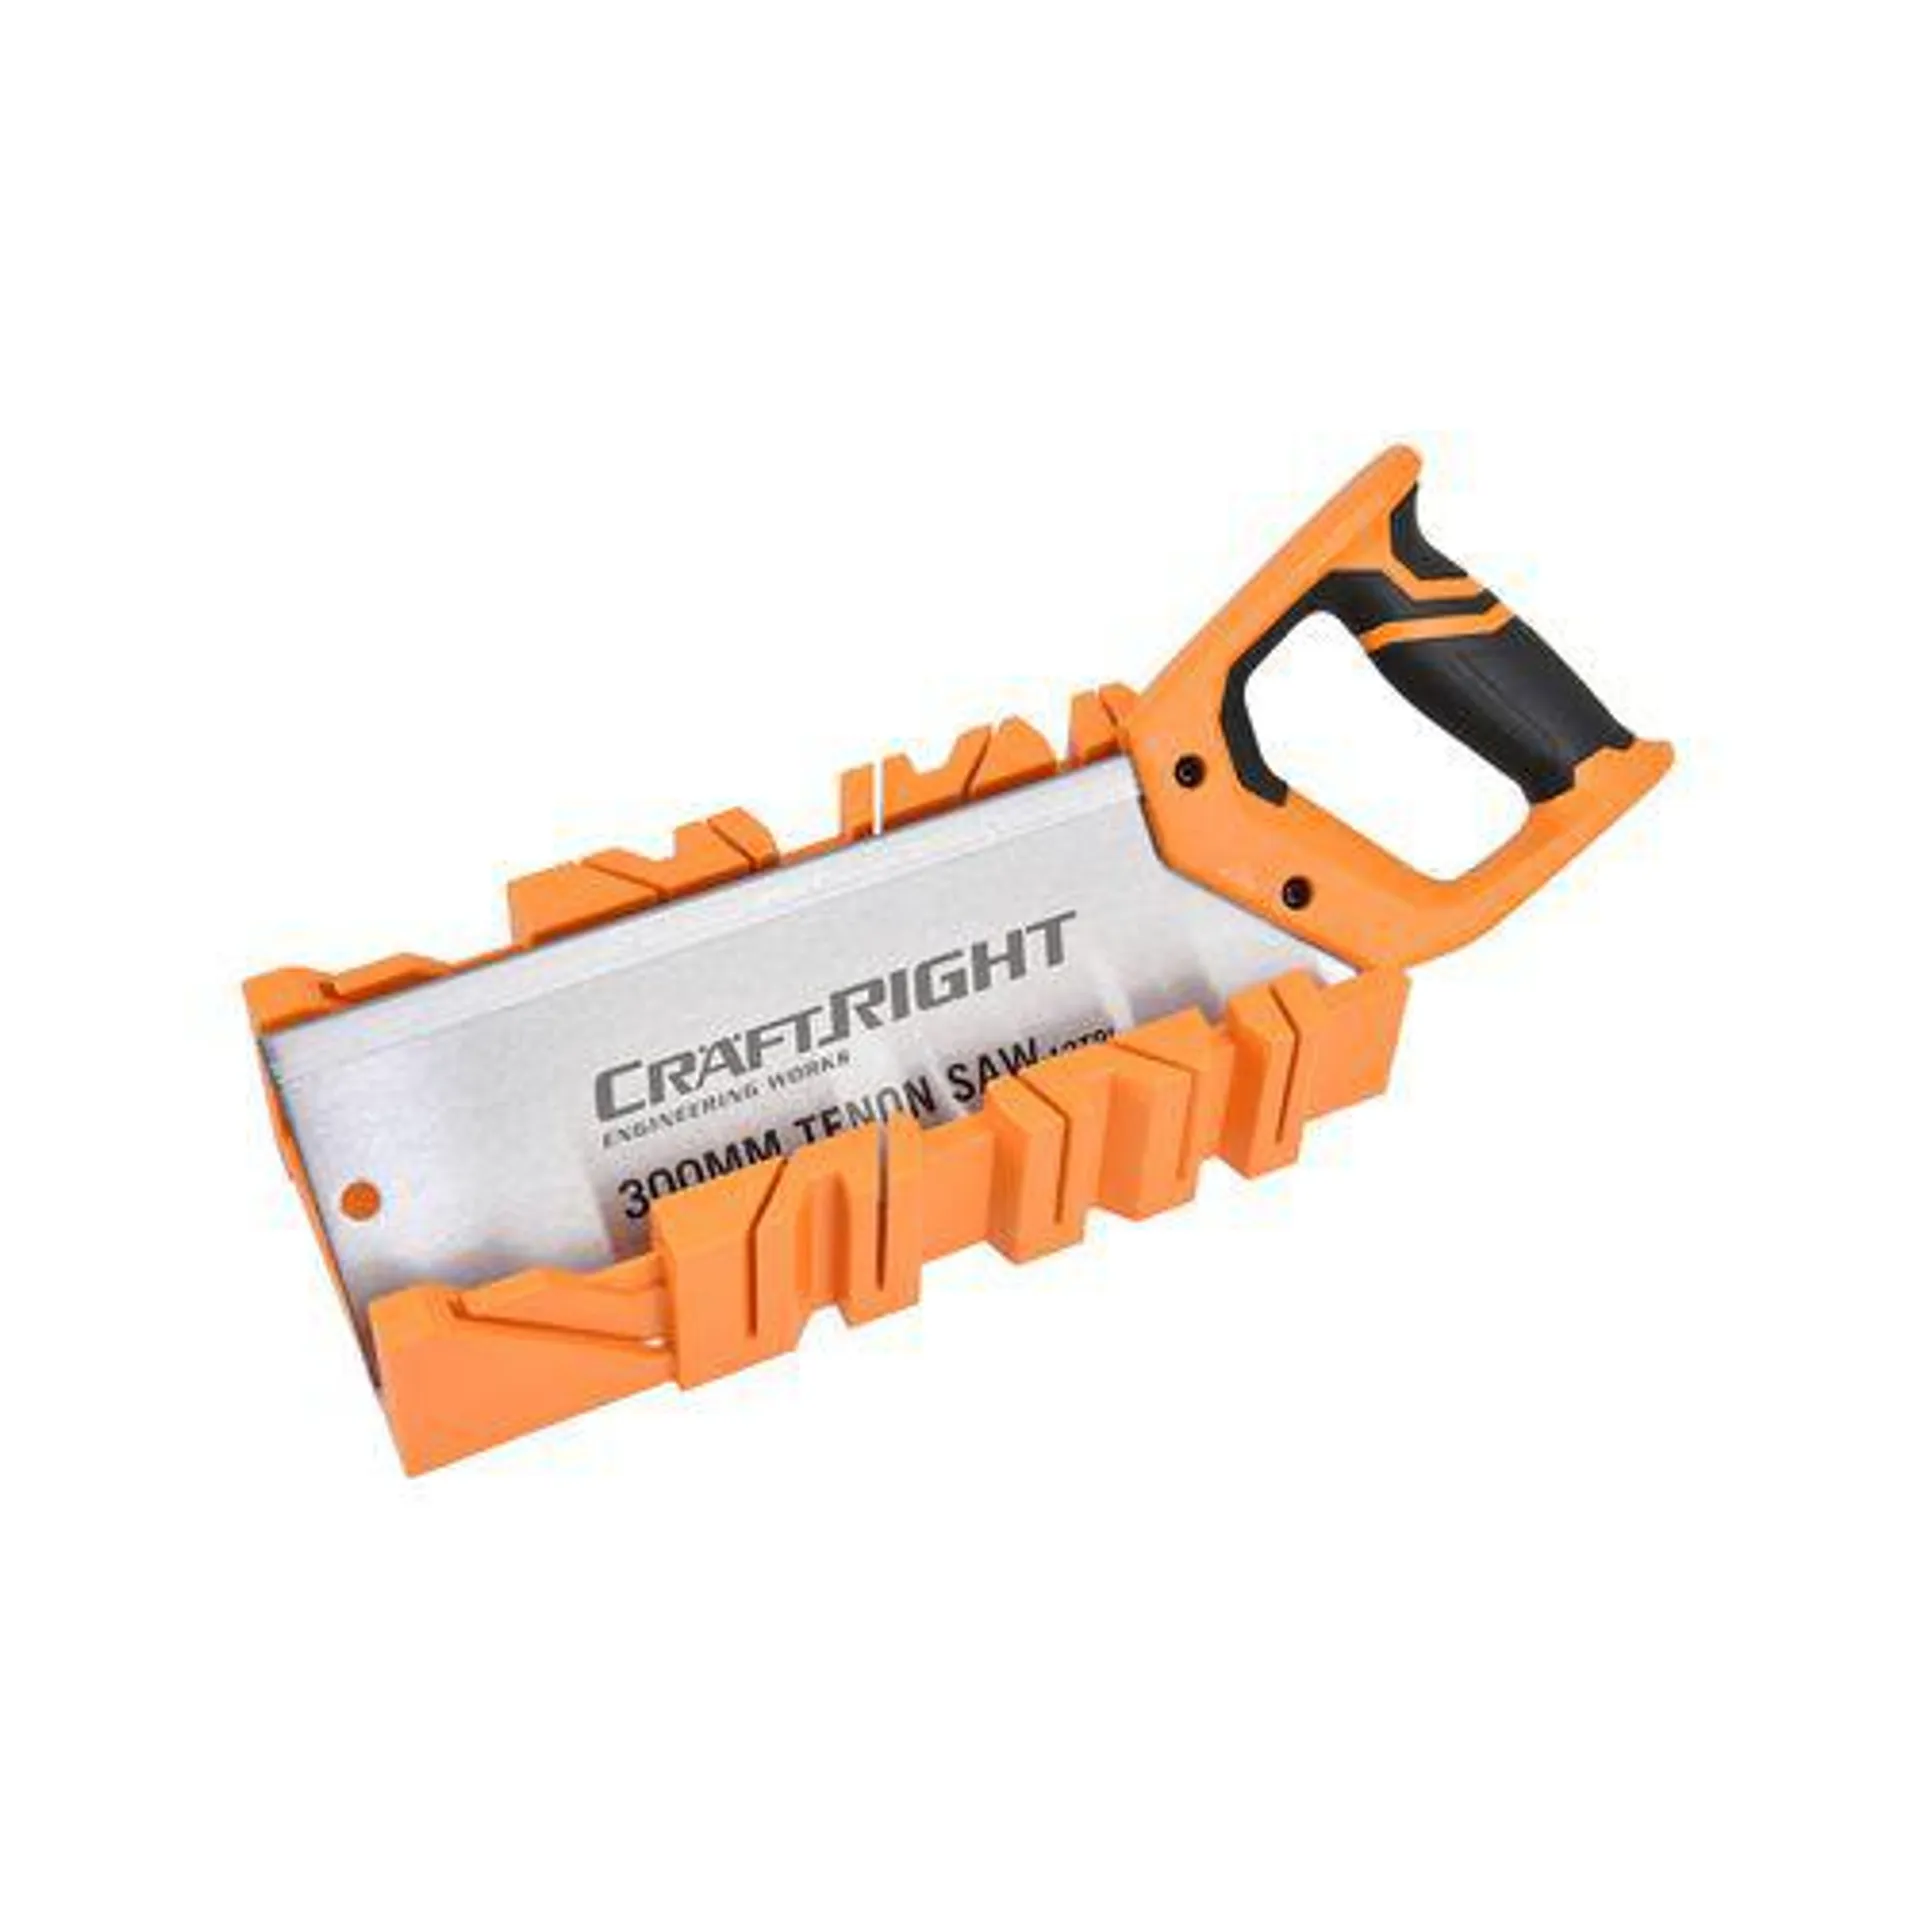 Craftright Mitre Box And Saw Set